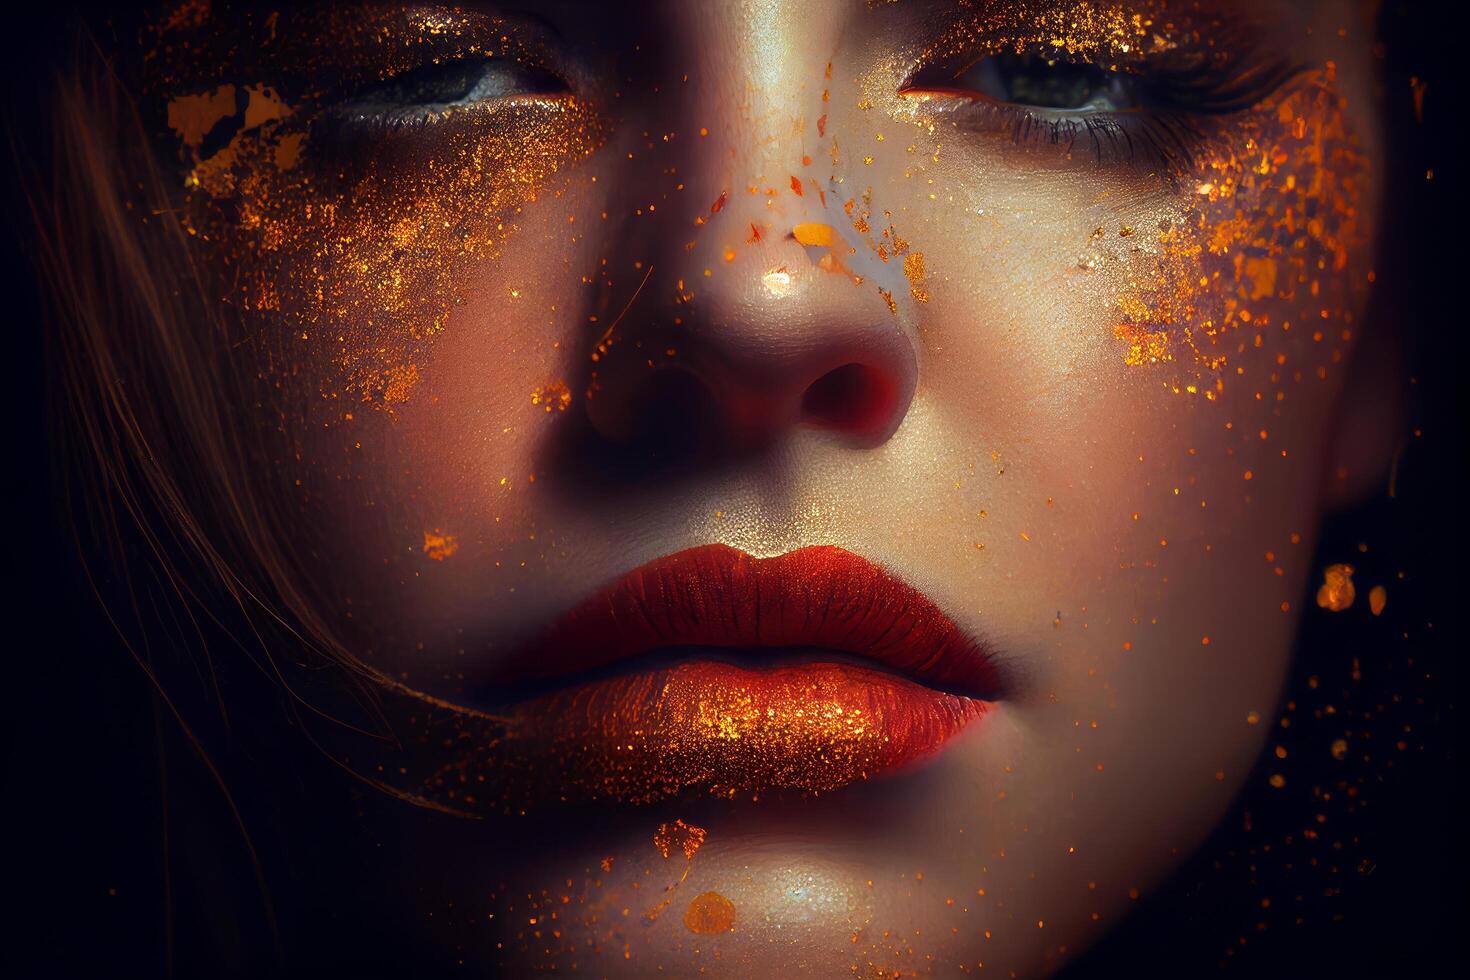 A girl' face lips close-up with golden glitter photo realistic